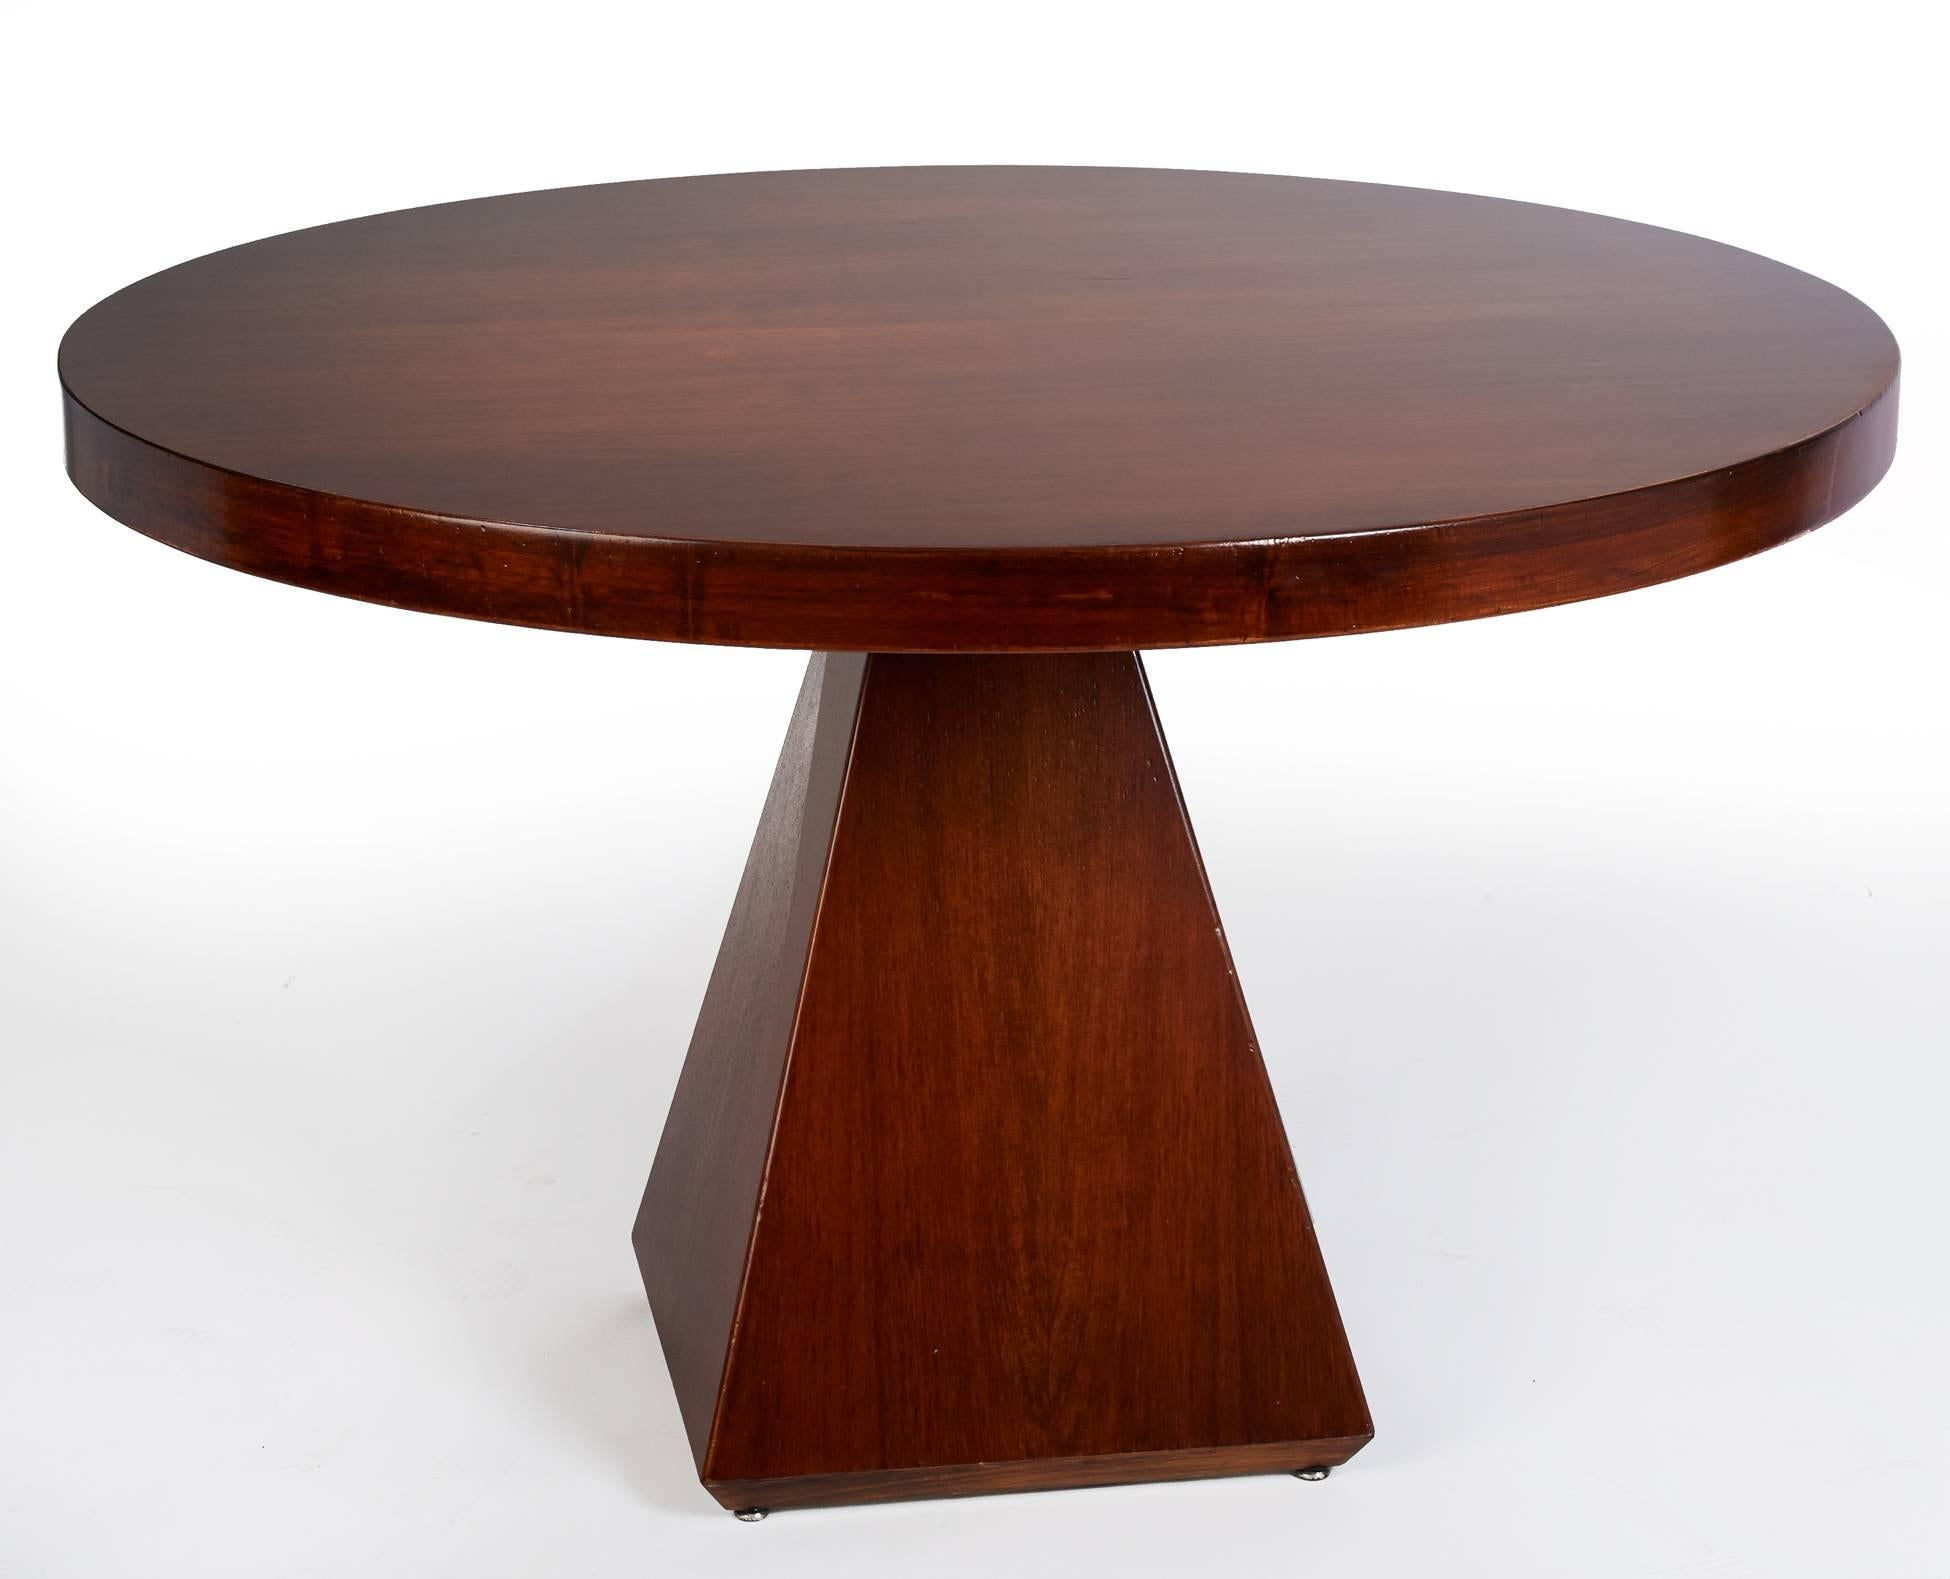 Italian Vittorio Introini: Geometric Walnut Dining Table with Round Top, Italy 1960's For Sale